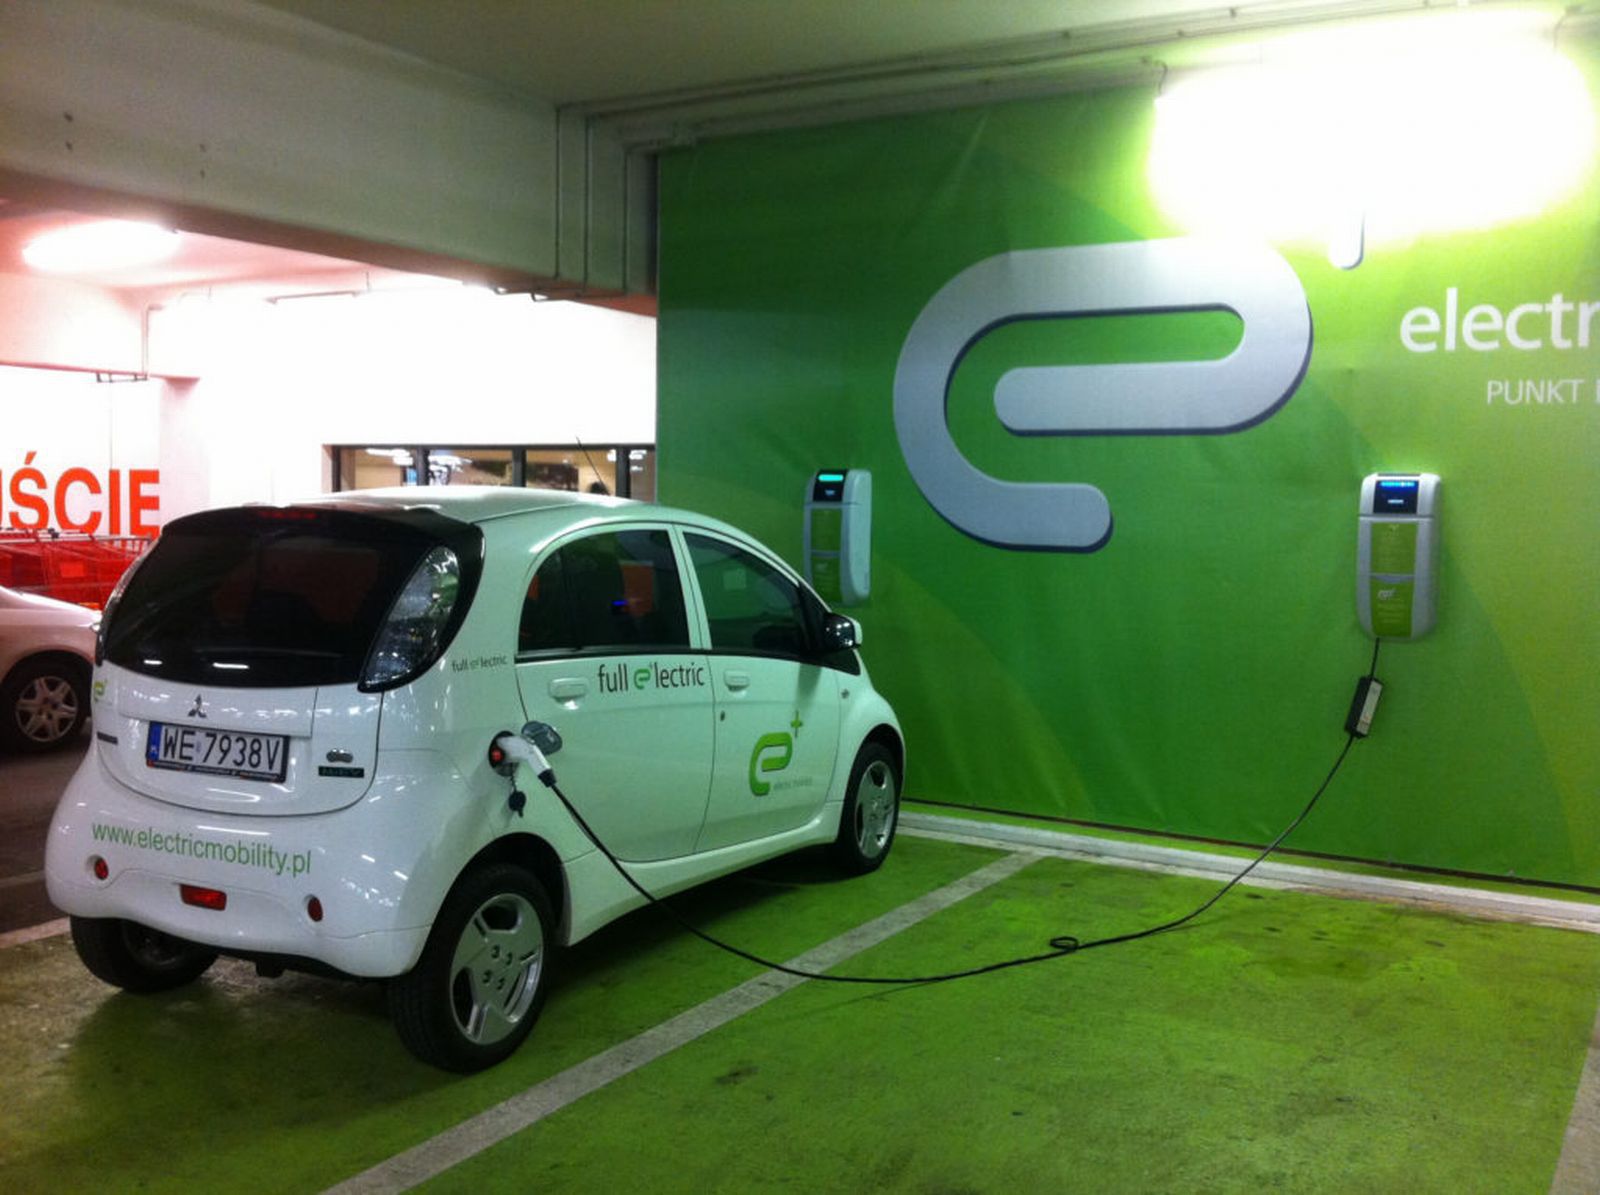 Electric_automobile_recharging_at_a_Warsaw_shopping_center_garage-1-1024x765.jpg